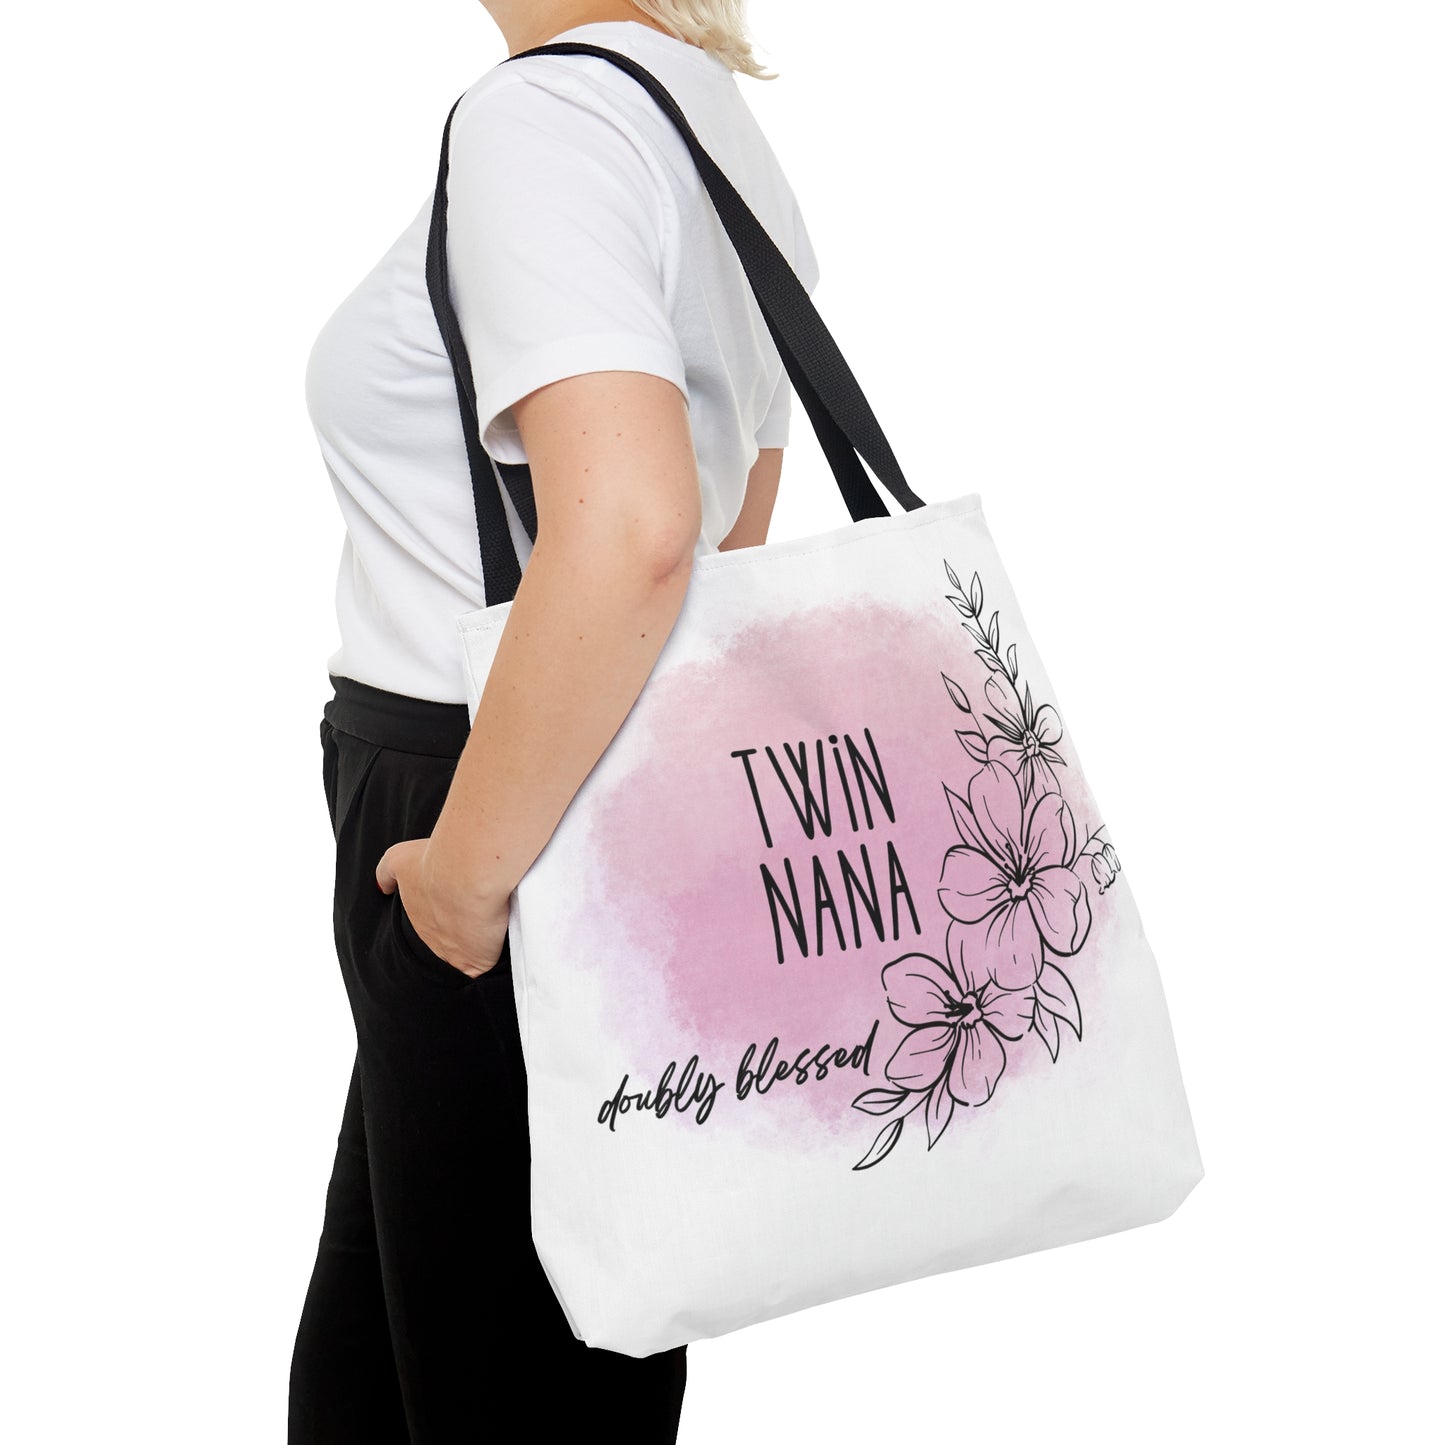 Twin Nana Doubly Blessed Pink Watercolor Large Tote Bag